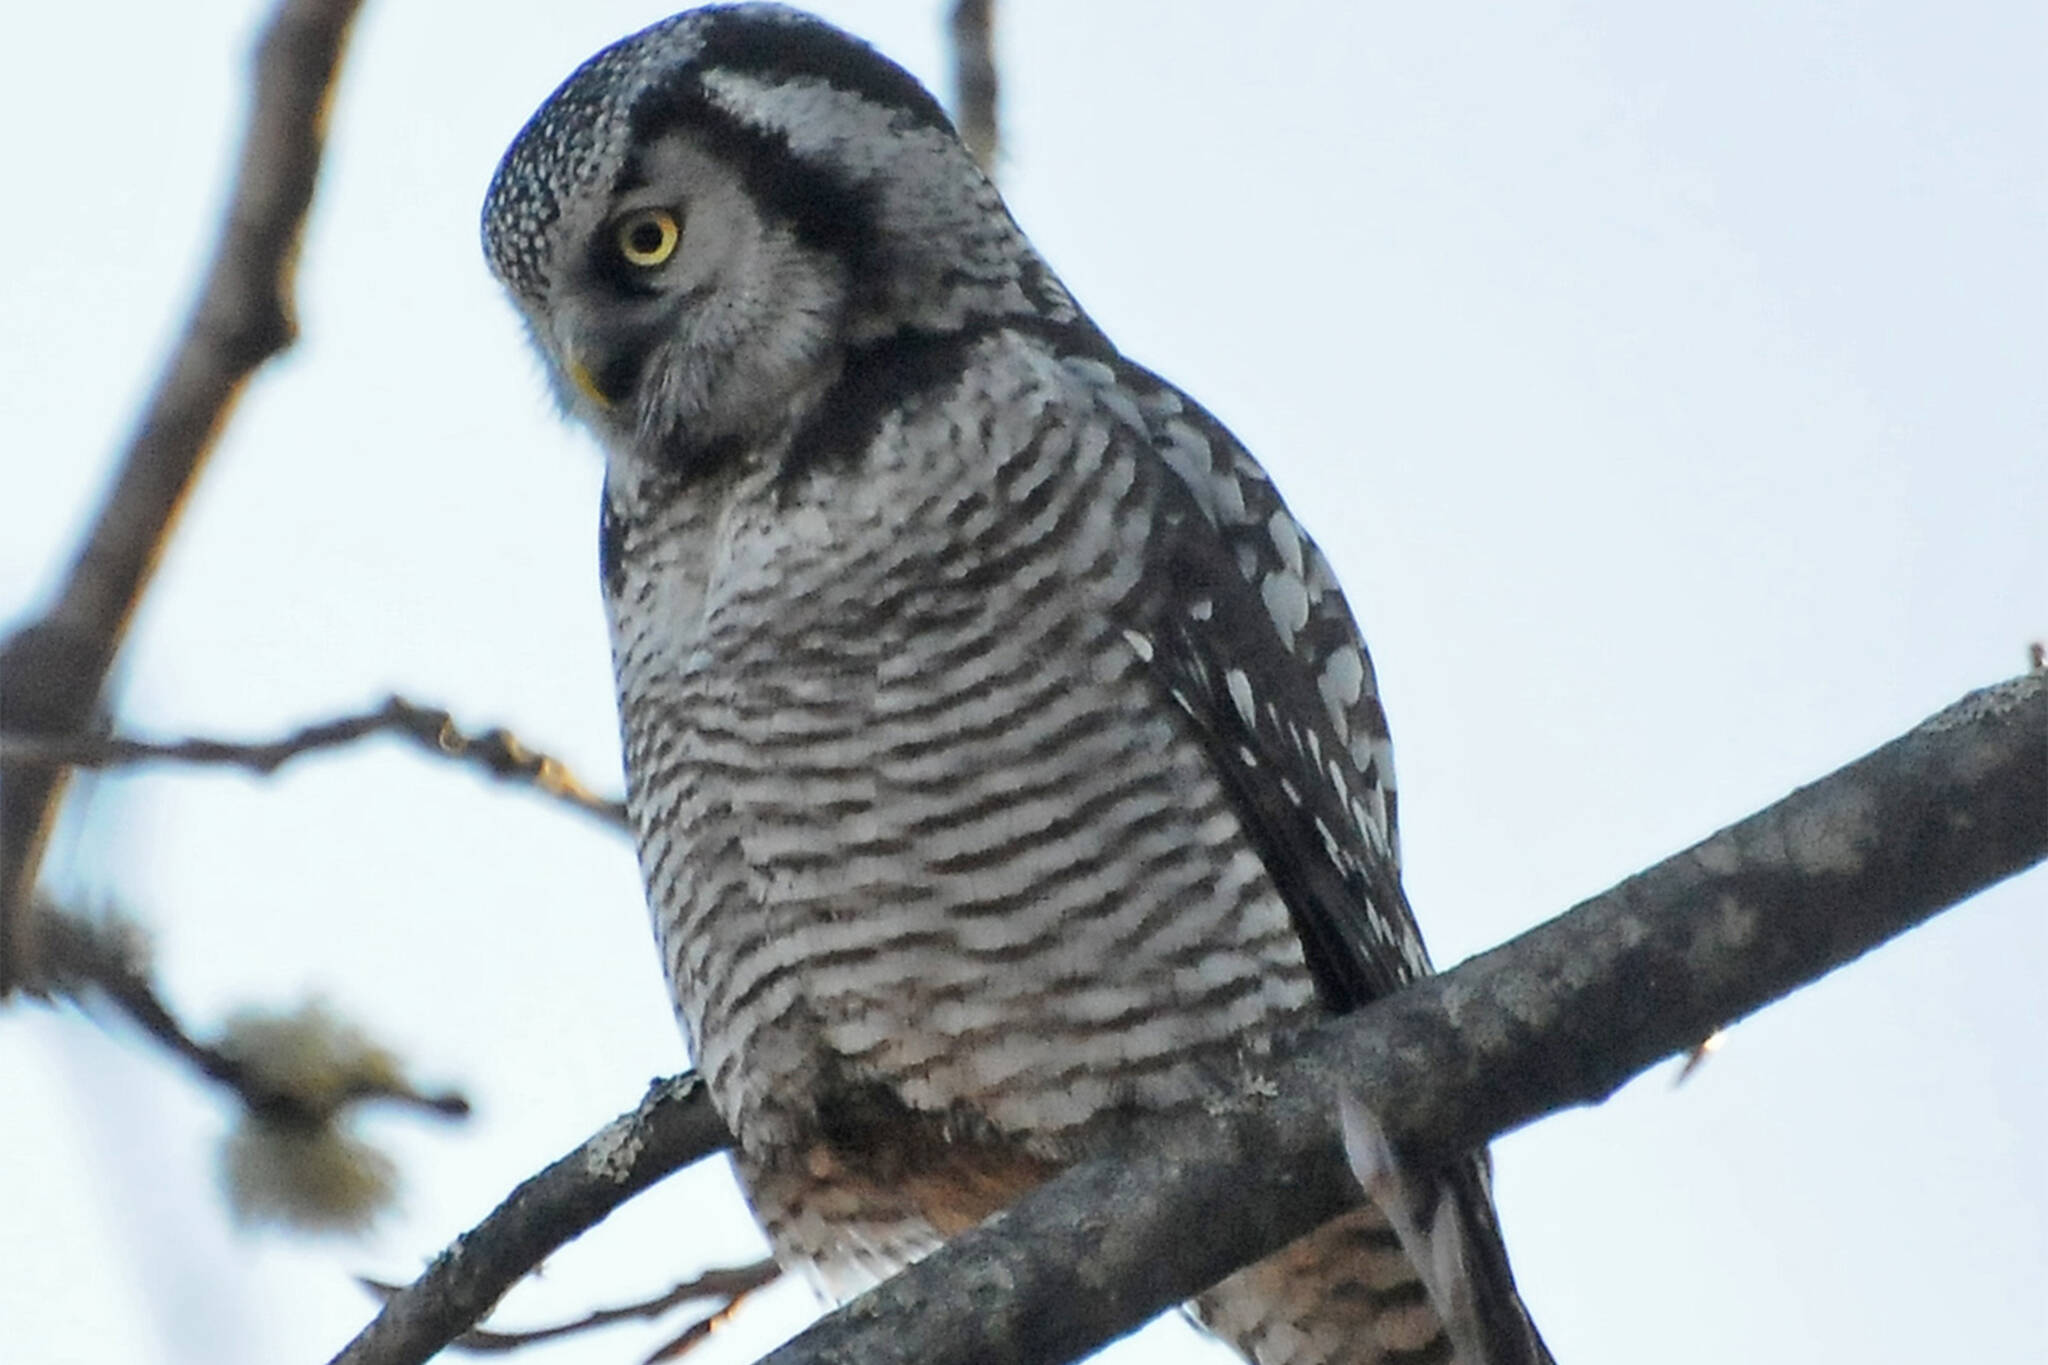 A hawk owl surveys the ground around its perch; note the white patches on the side of the head and the facial disc. (Courtesy Photo / Bob Armstrong)